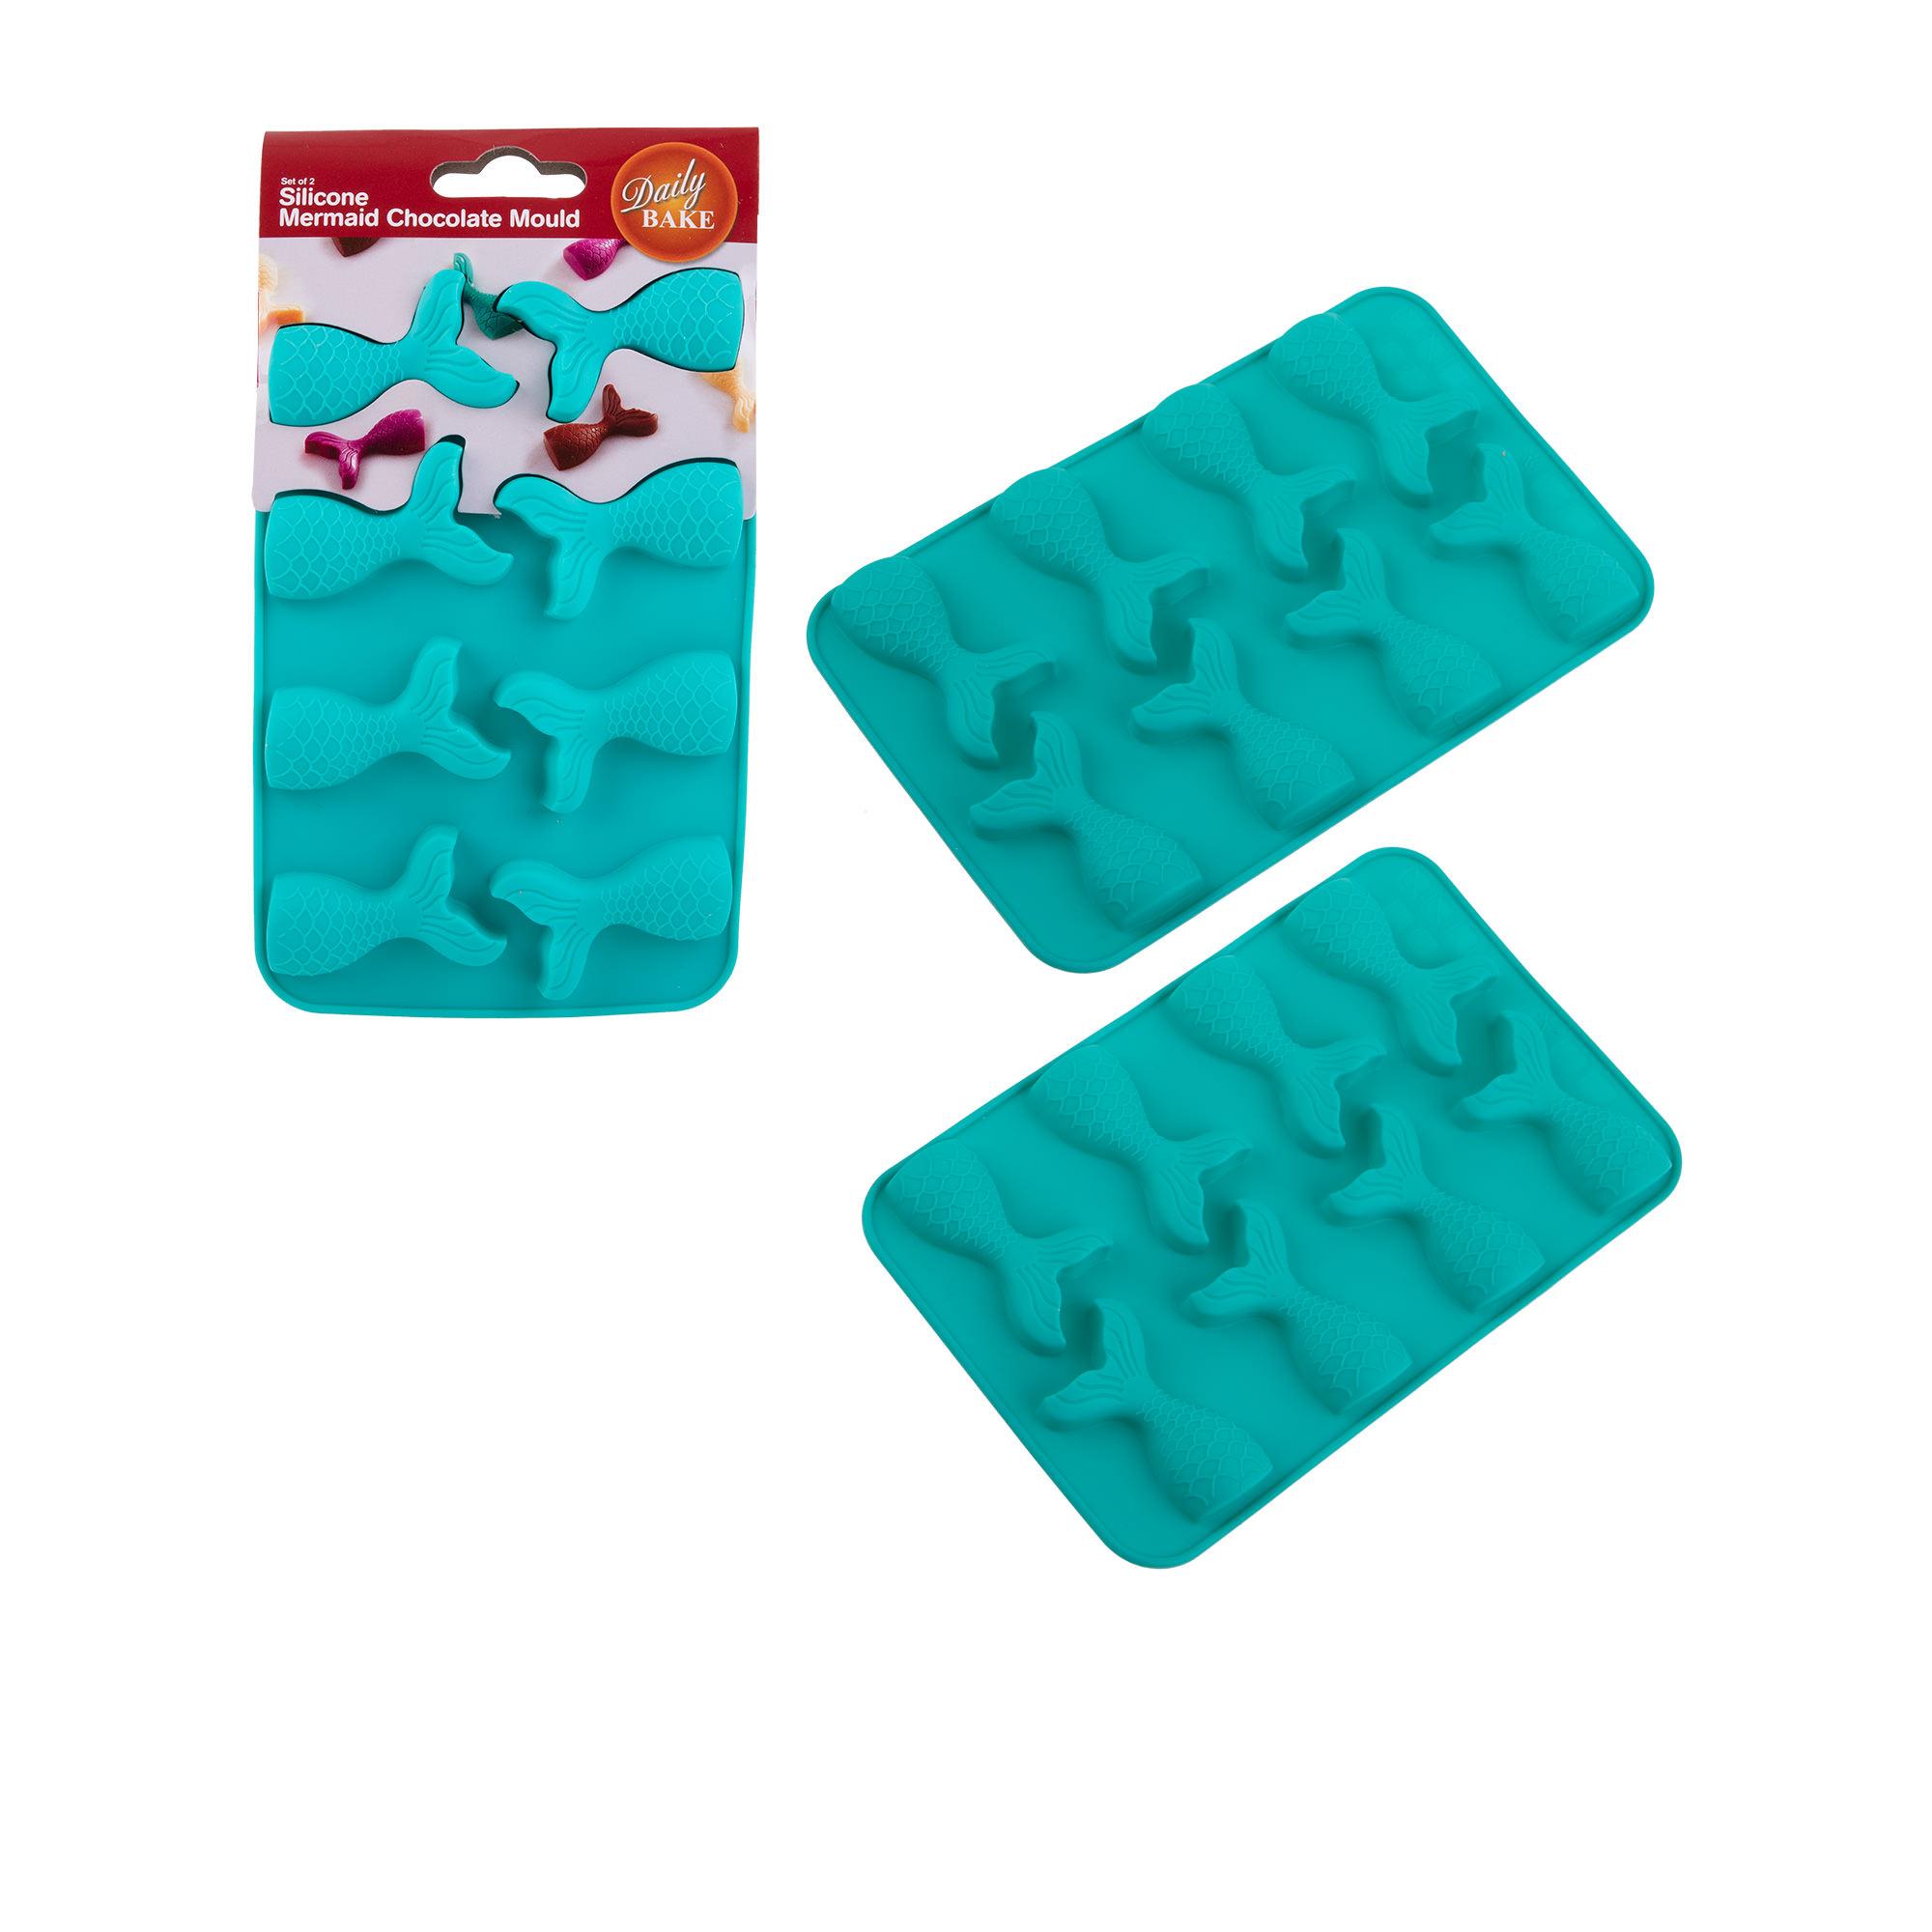 Daily Bake Mermaid 8 Cup Chocolate Mould Set 2pc Turquoise Image 3